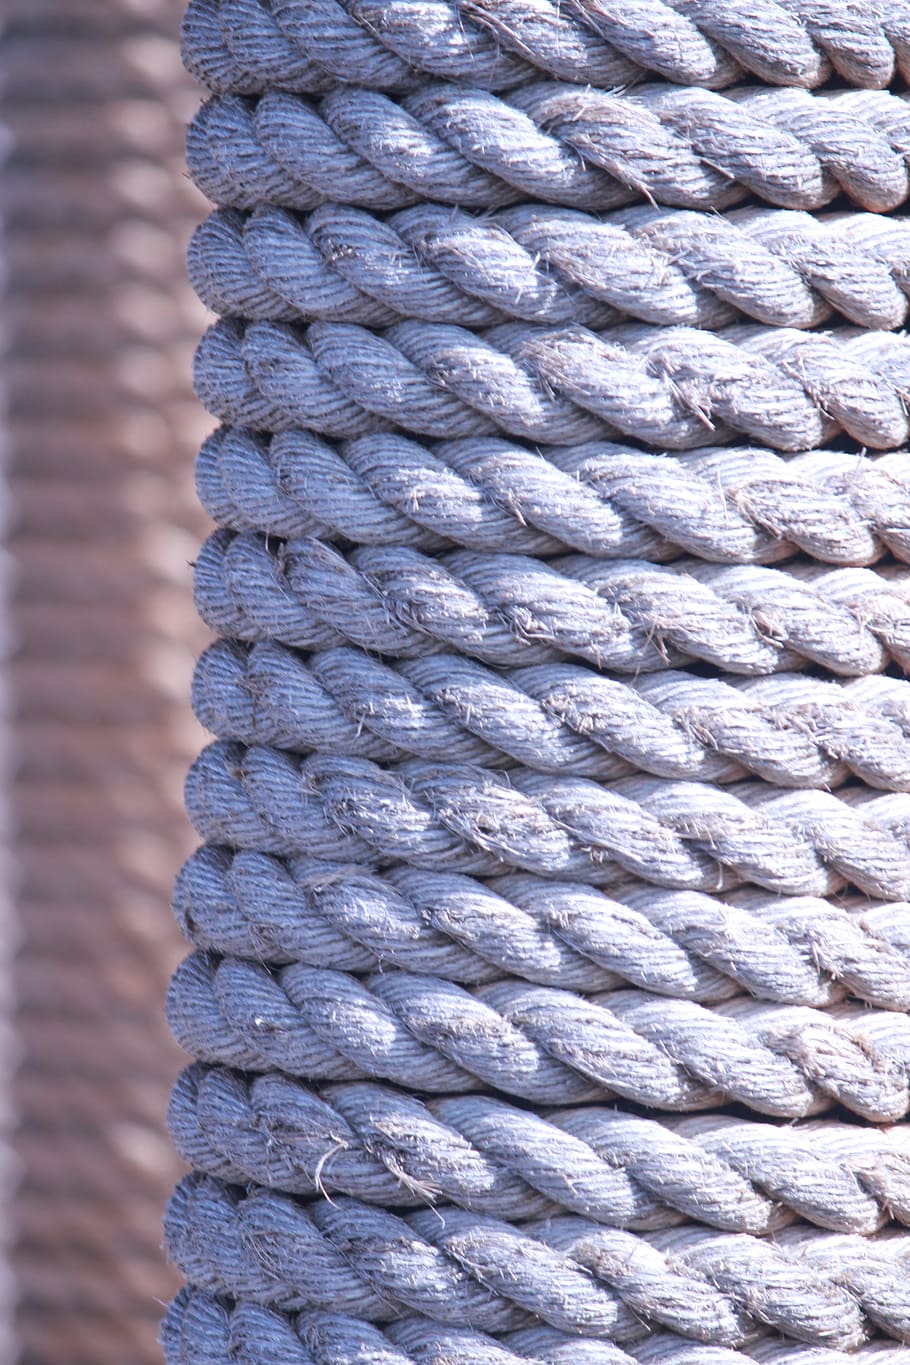 rope, nautical, marine, backgrounds, pattern, close-up, full frame, repetition, in a row, gray